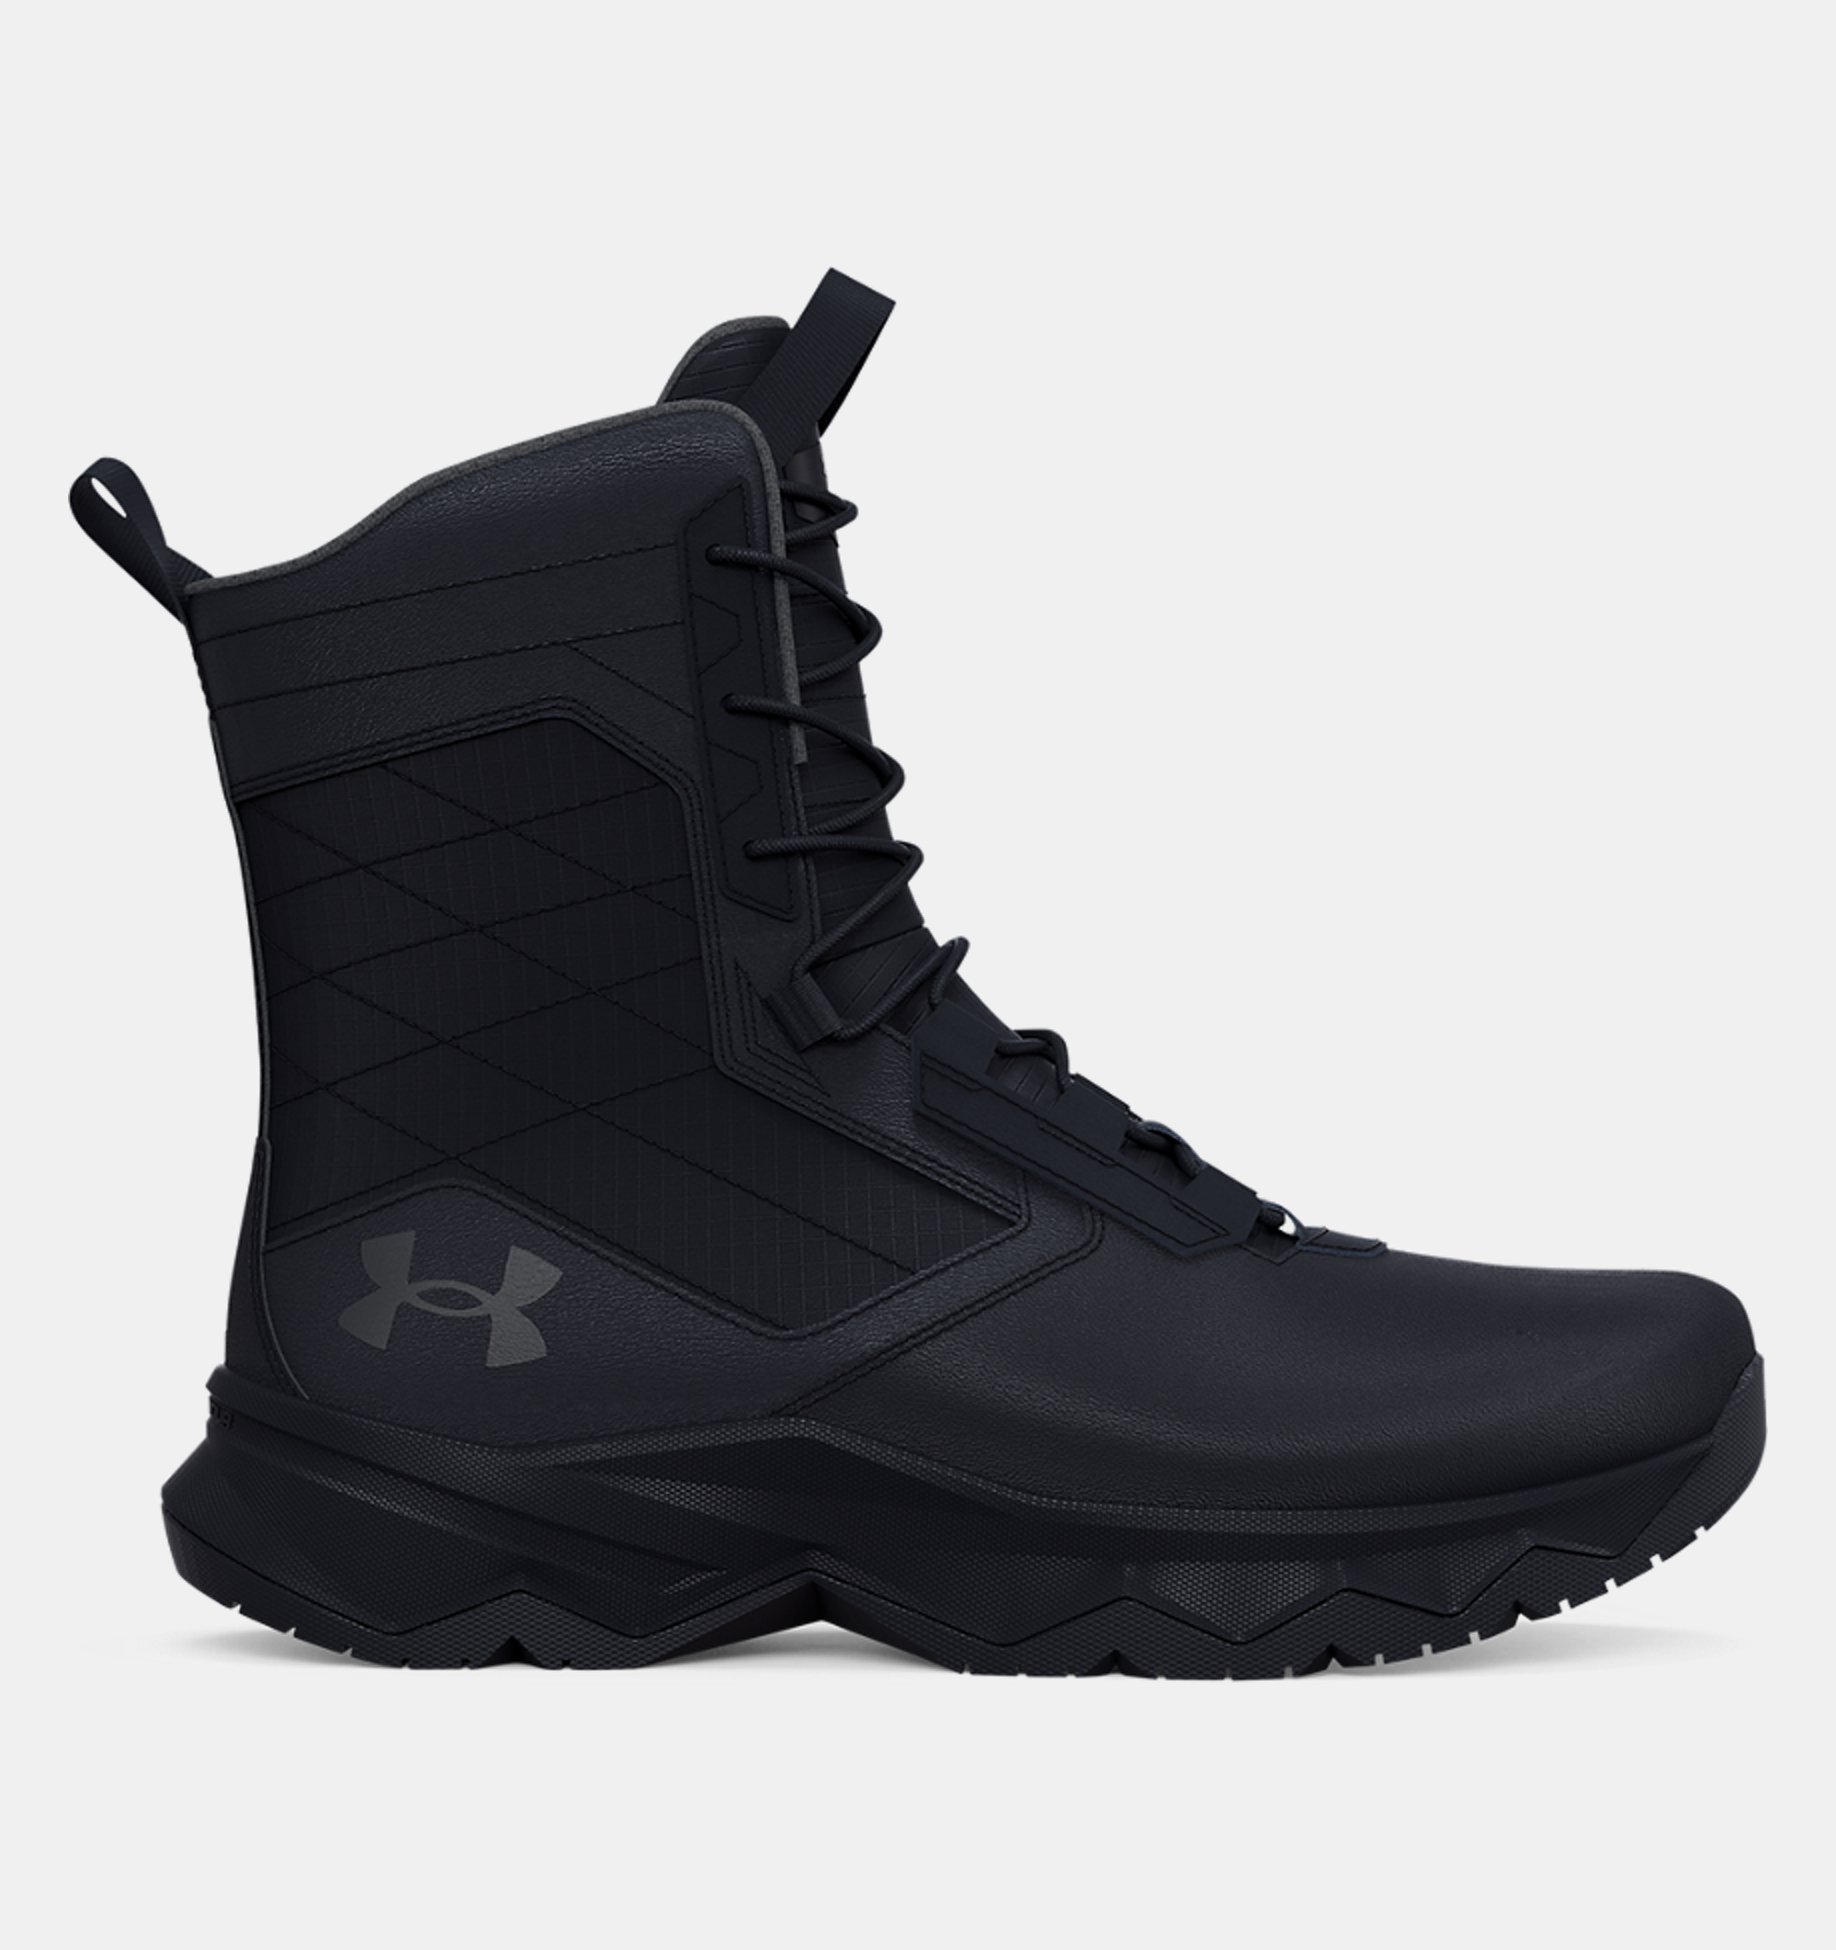 NIB Under Armour Men's Stellar Military and Tactical Boots in Black Leather 